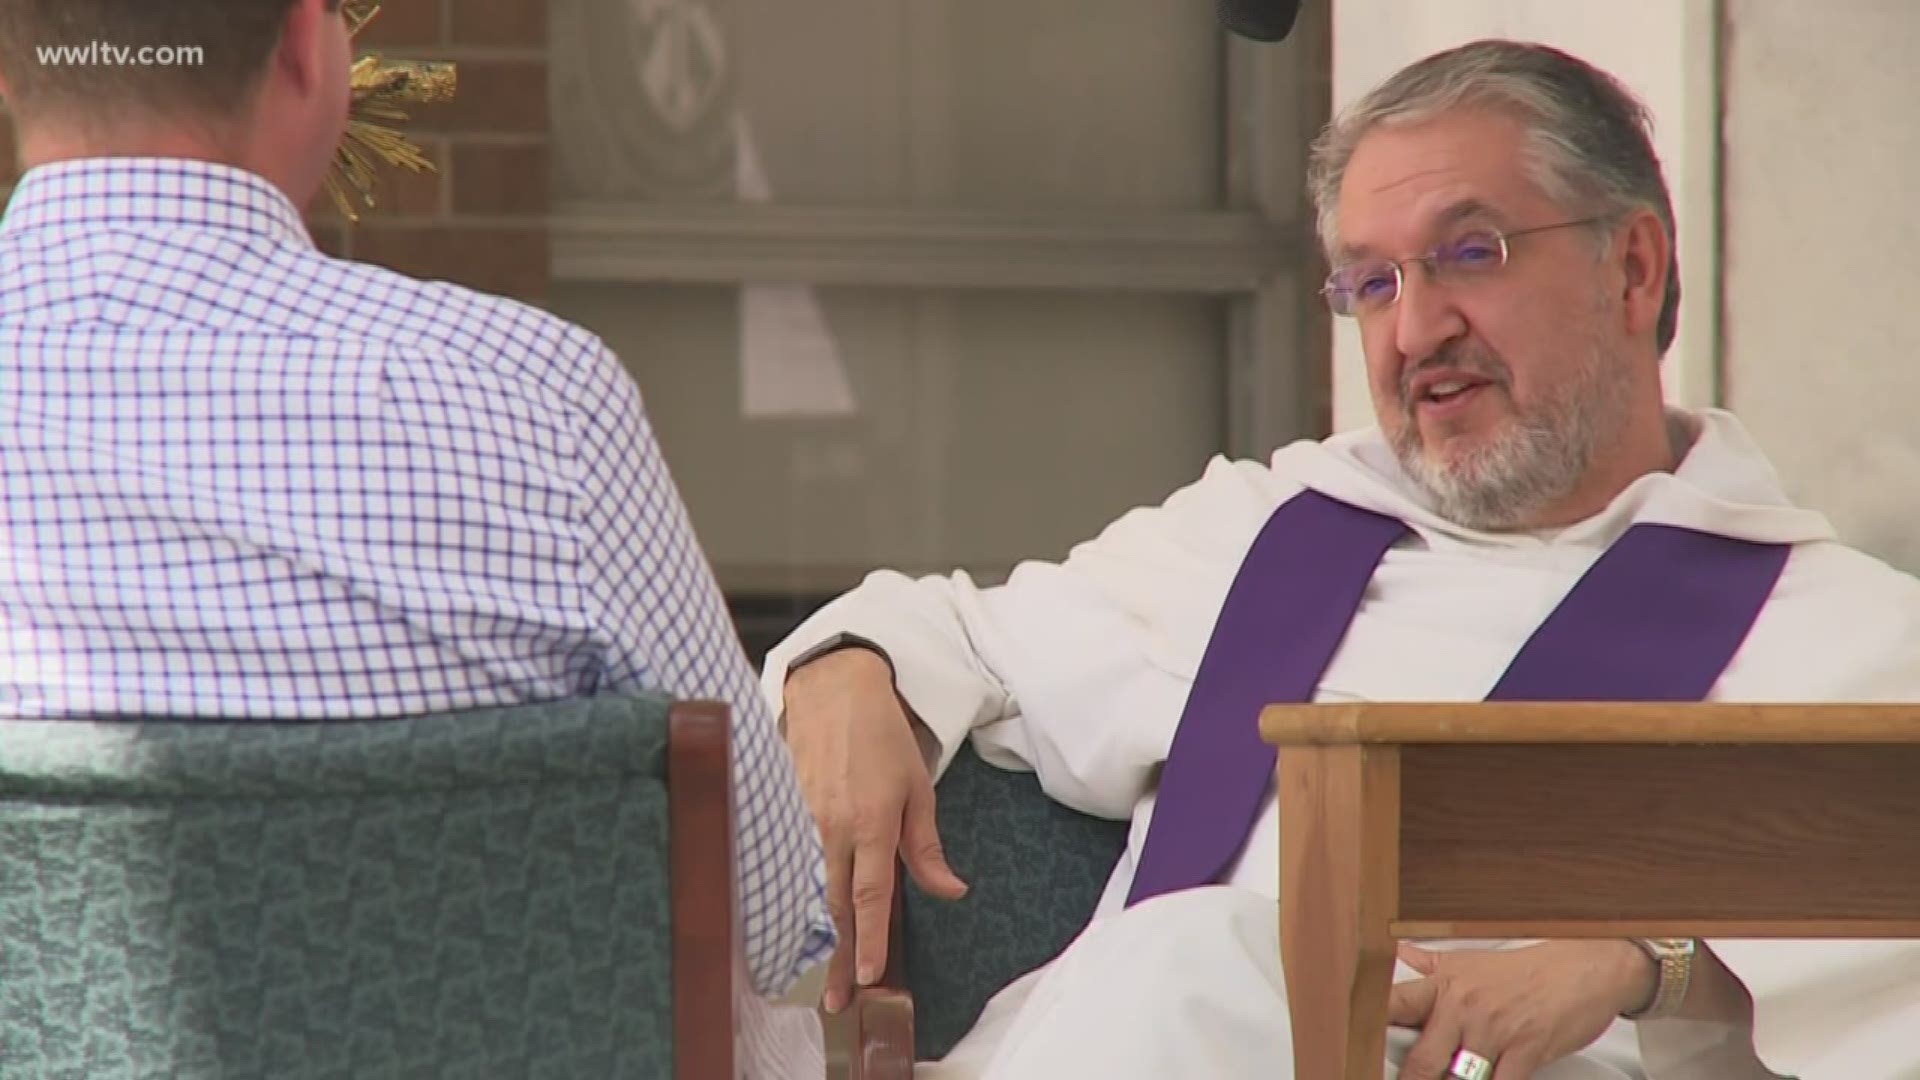 New Orleans Archbishop Gregory Aymond has stopped public Masses for now, but Restrepo still celebrates it daily in a thoroughly modern way: live on Facebook.